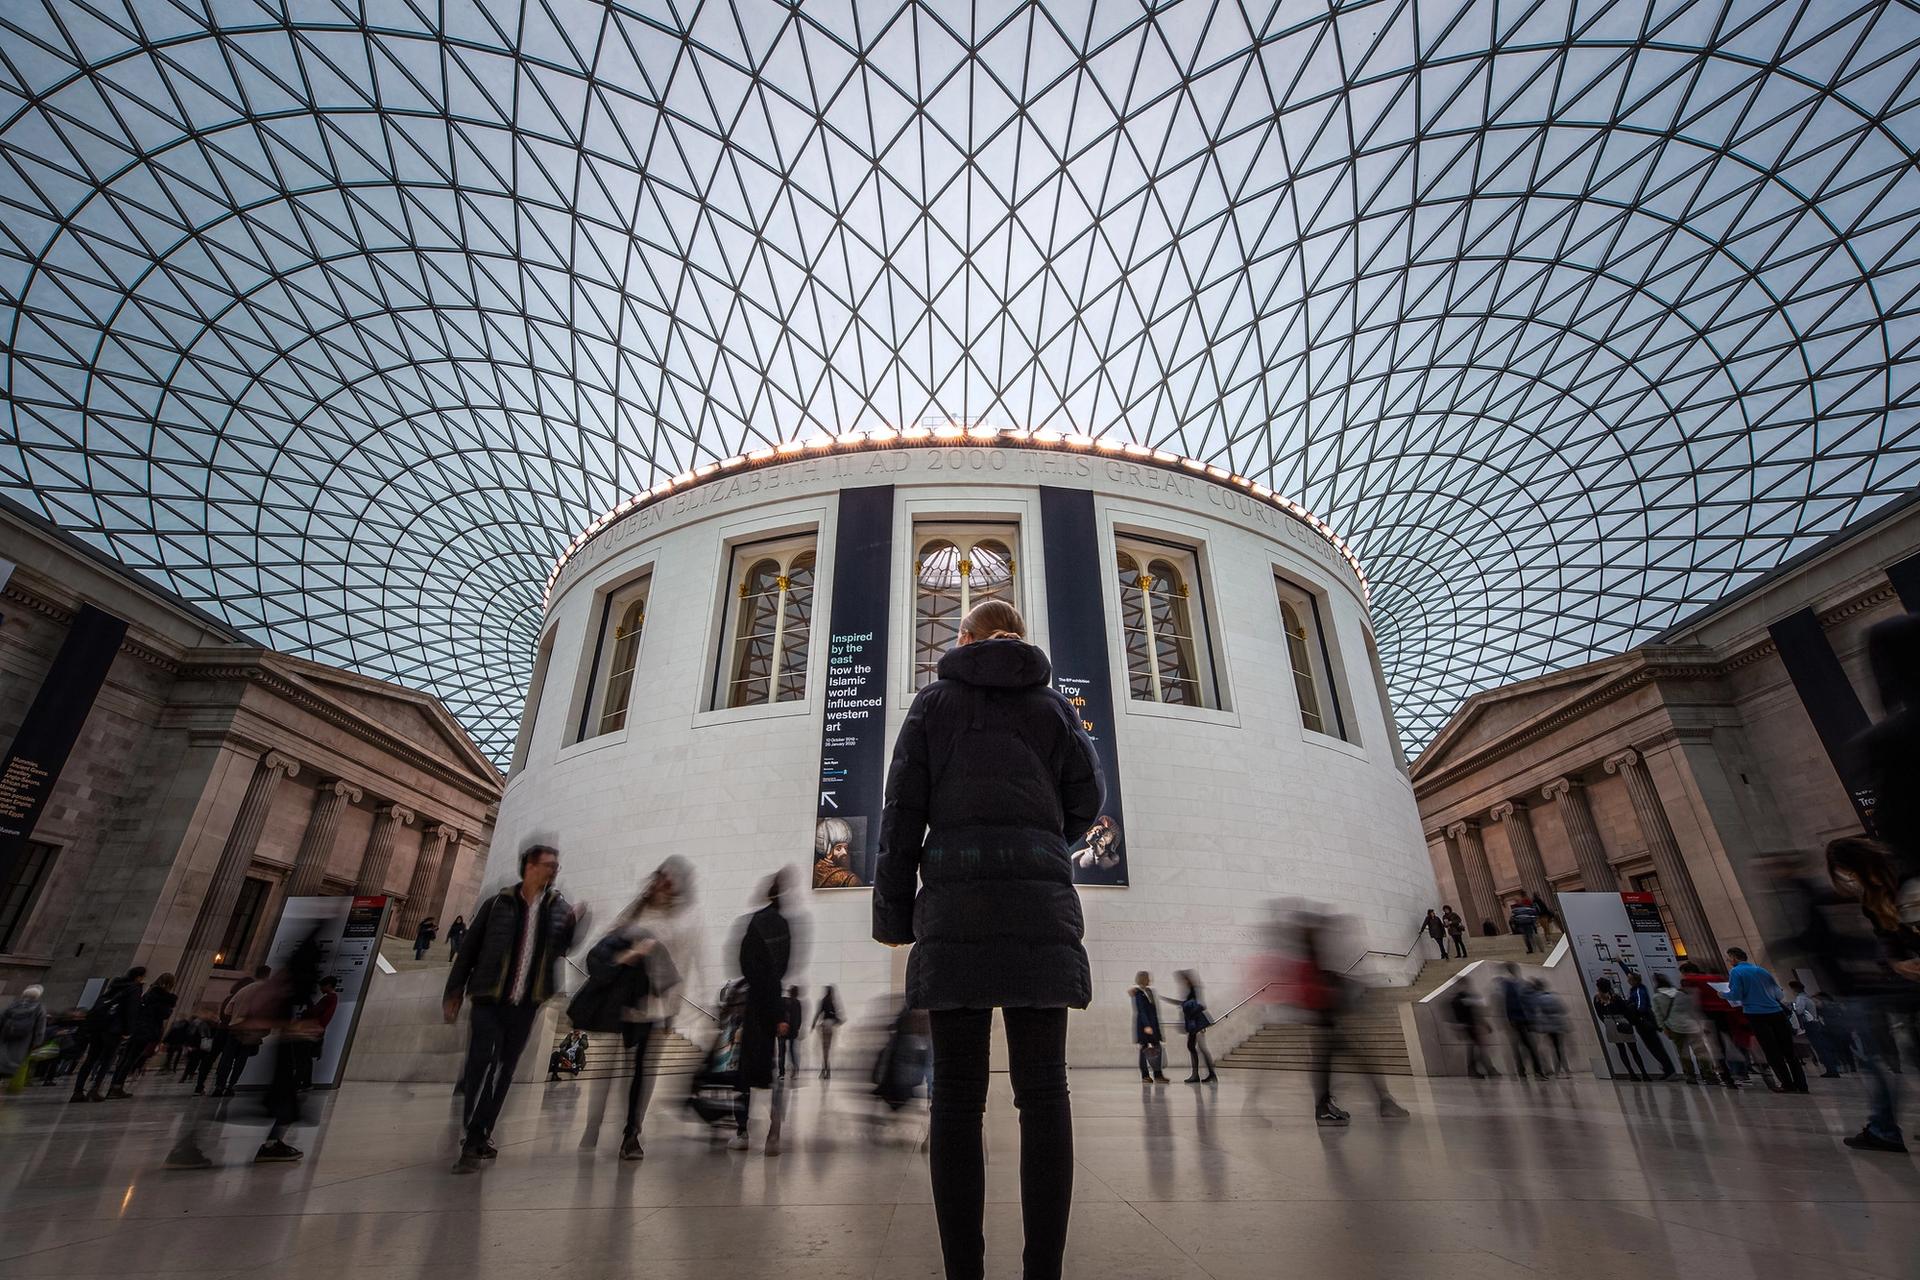 "The museum is delivering a programme—'Reimagining the British Museum'—which will explore and develop new curatorial approaches, with global collaboration at its heart, to interpret the collection and inform a future comprehensive redisplay of its galleries.” Photo: Brian Tomlinson